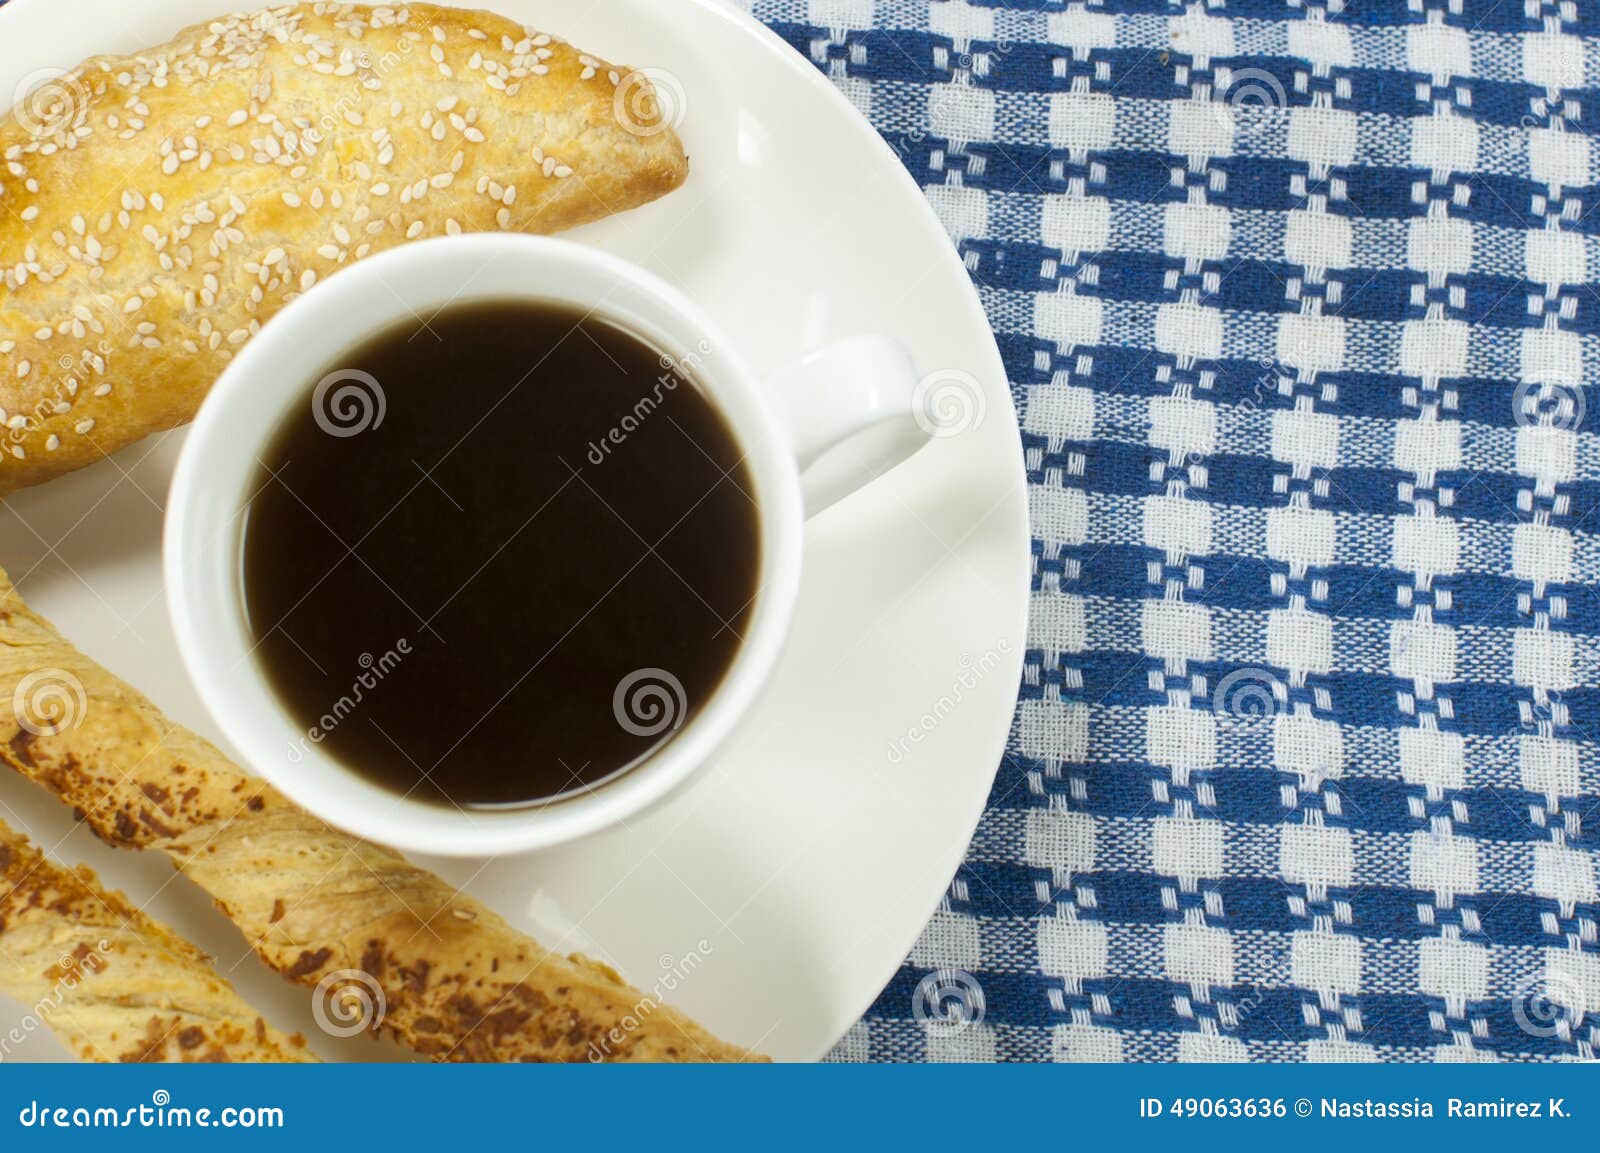 coffee with empanada and cheese sticks